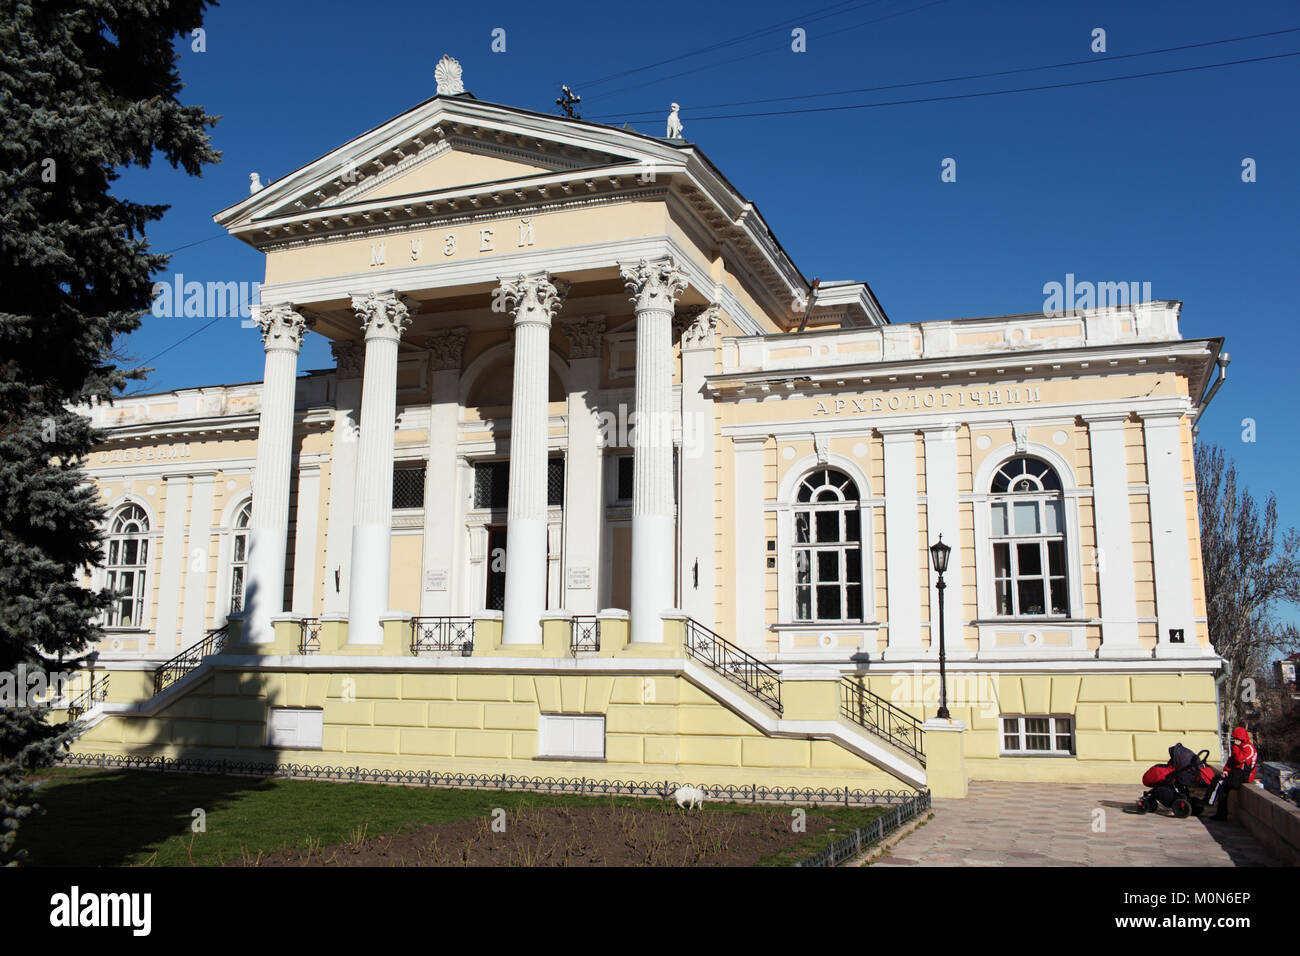 Odessa, Ukraine - March 23, 2015: People near the Archaeological museum. Founded in 1825, it is one of the oldest museums in Ukraine Stock Photo